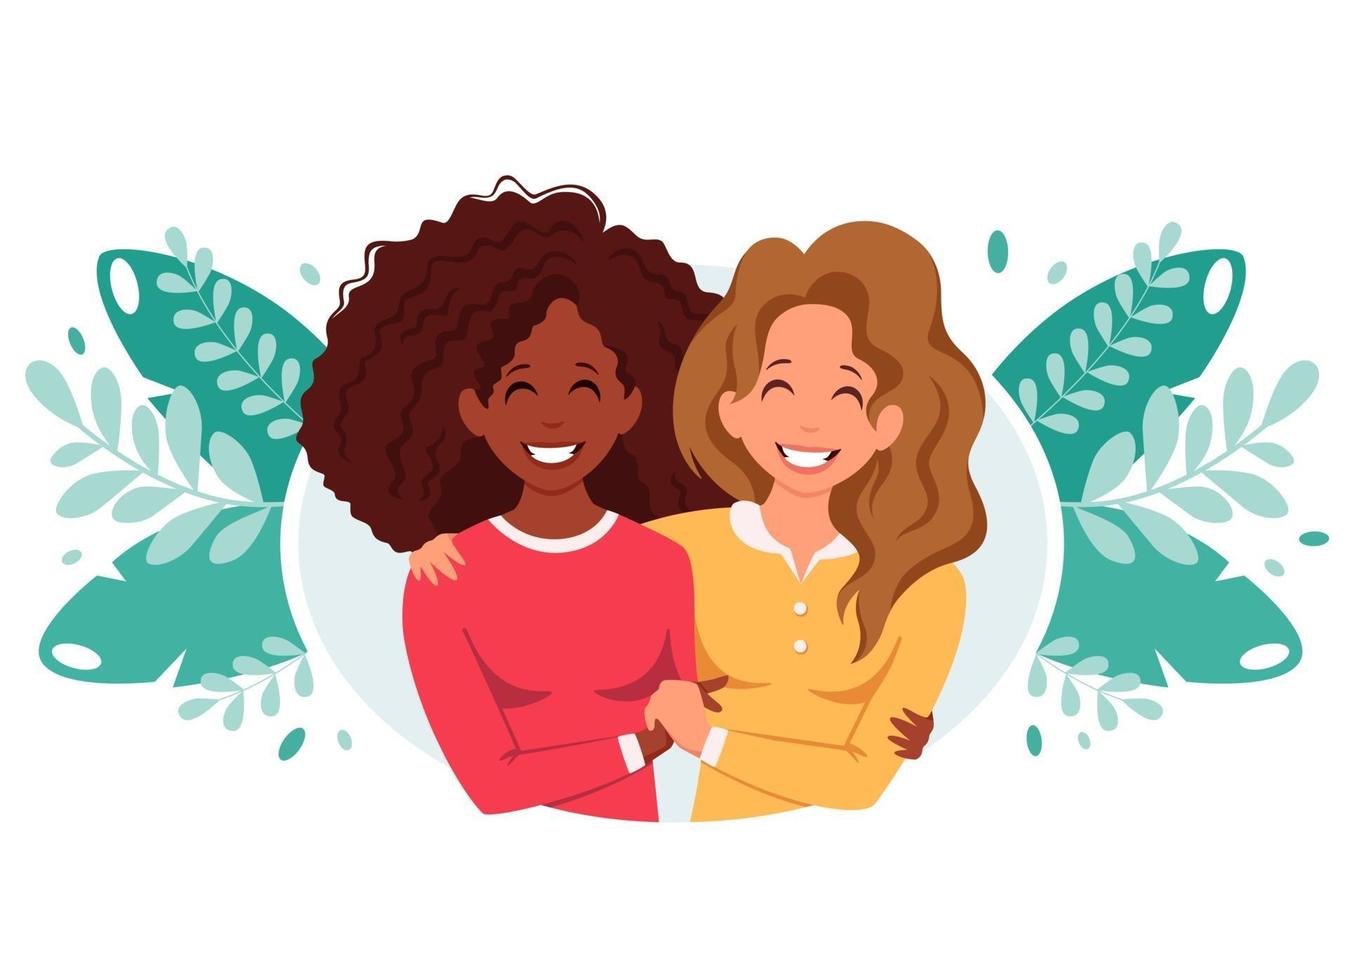 Womens hugging. LGBT concept. Vector illustration in flat style.